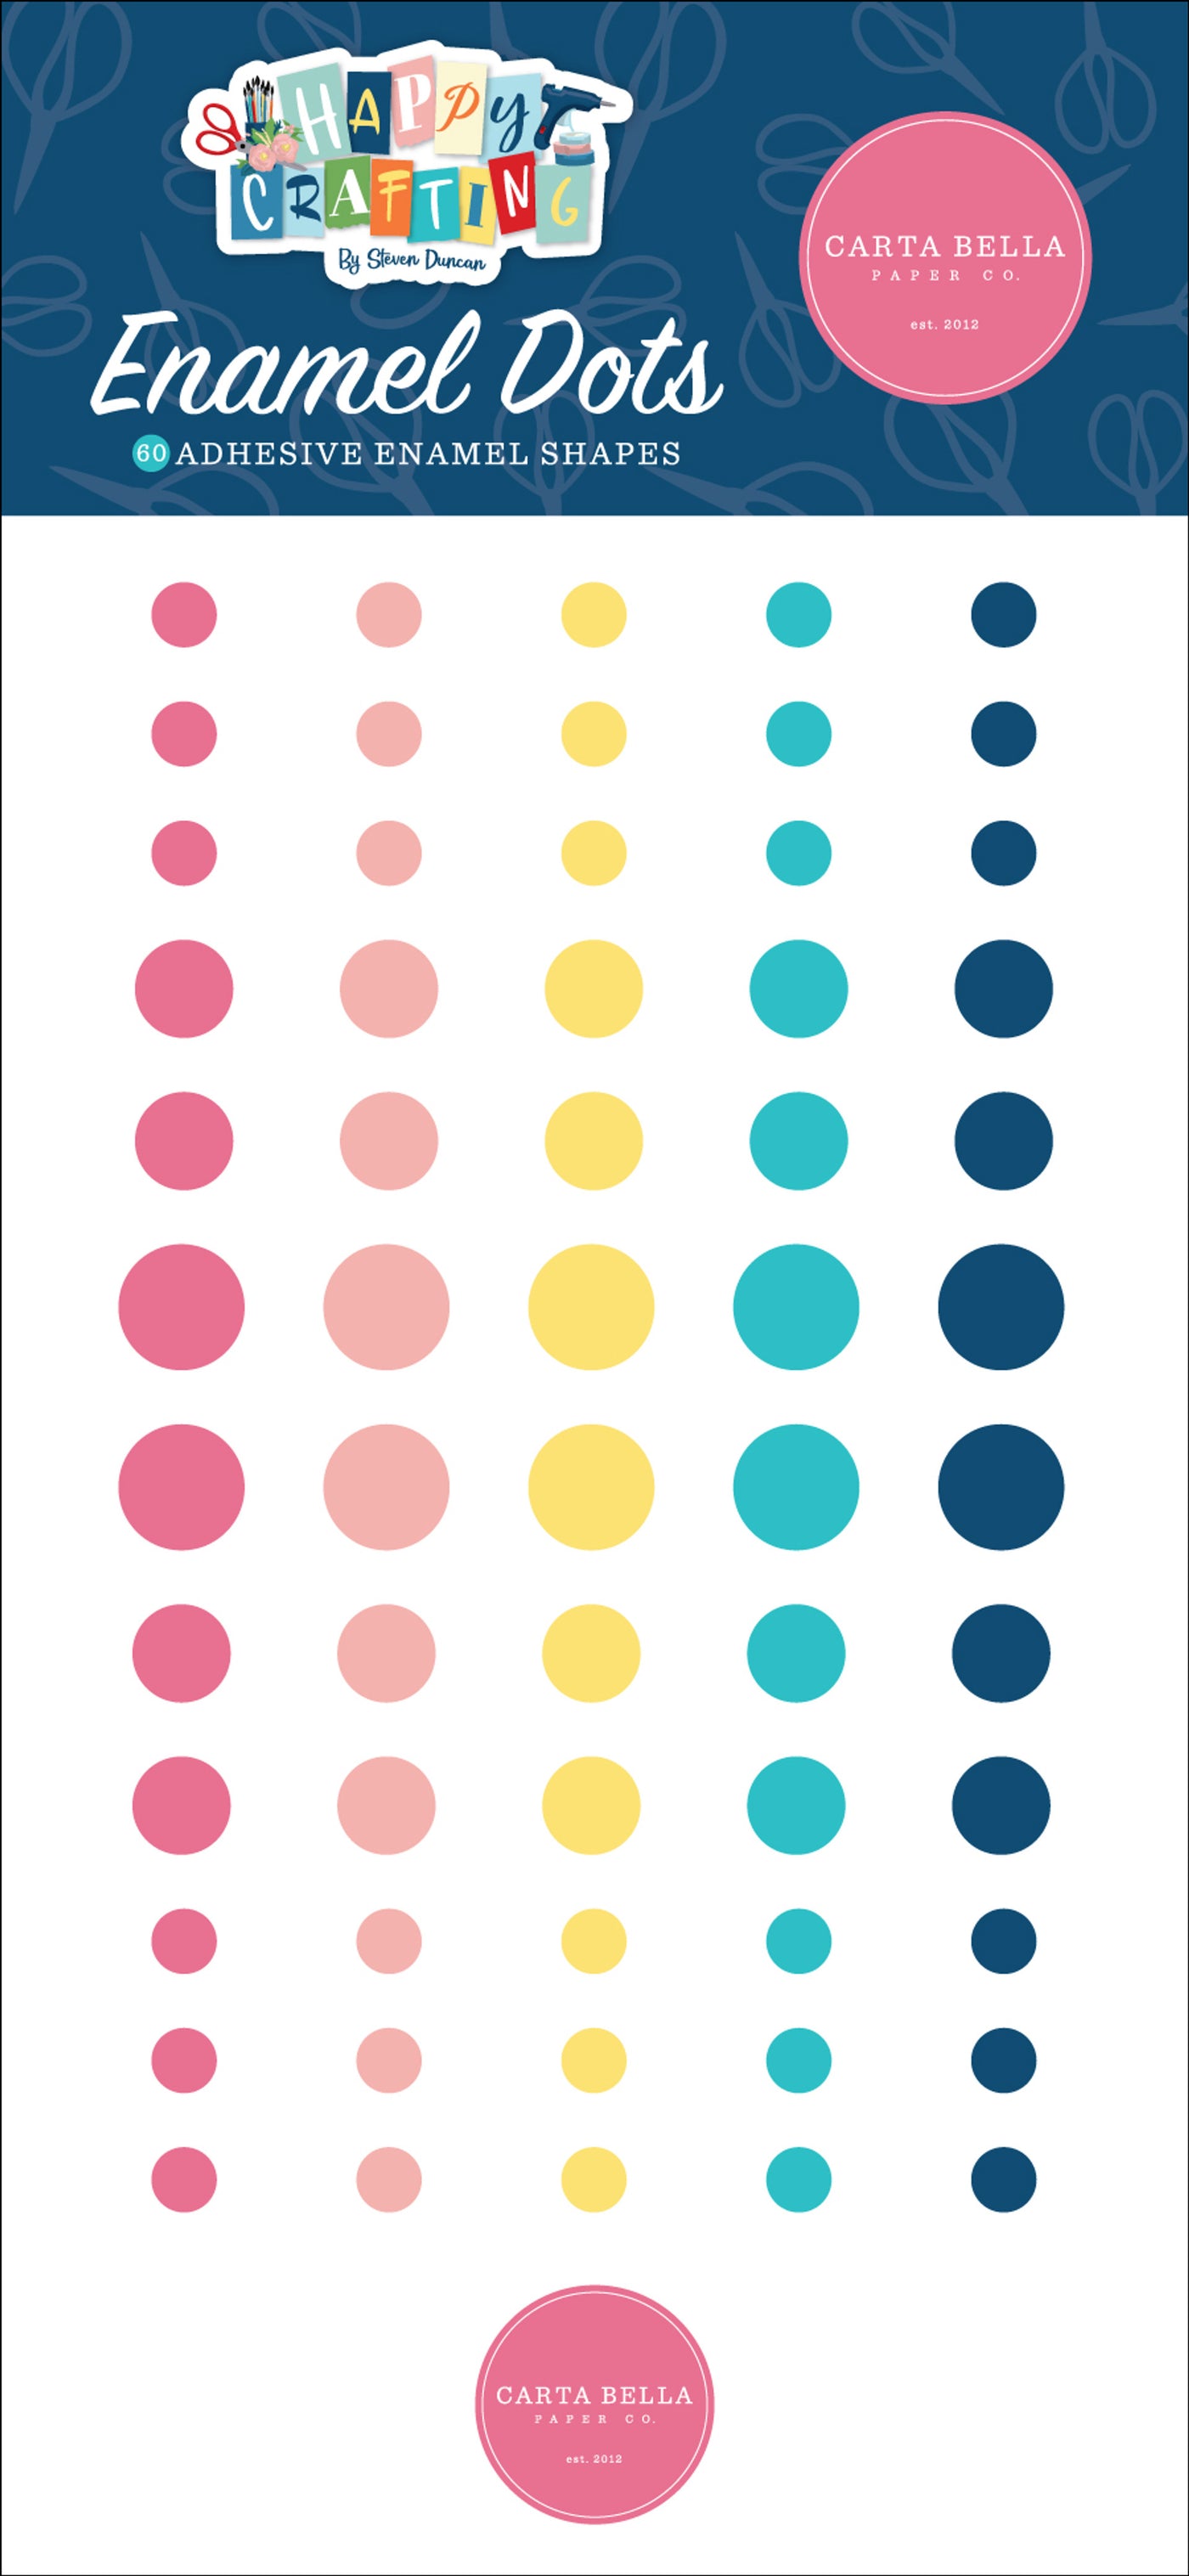 60 Enamel Dots in 3 sizes, adhesive back, designed to coordinate with Happy Crafting Collection by Carta Bella.